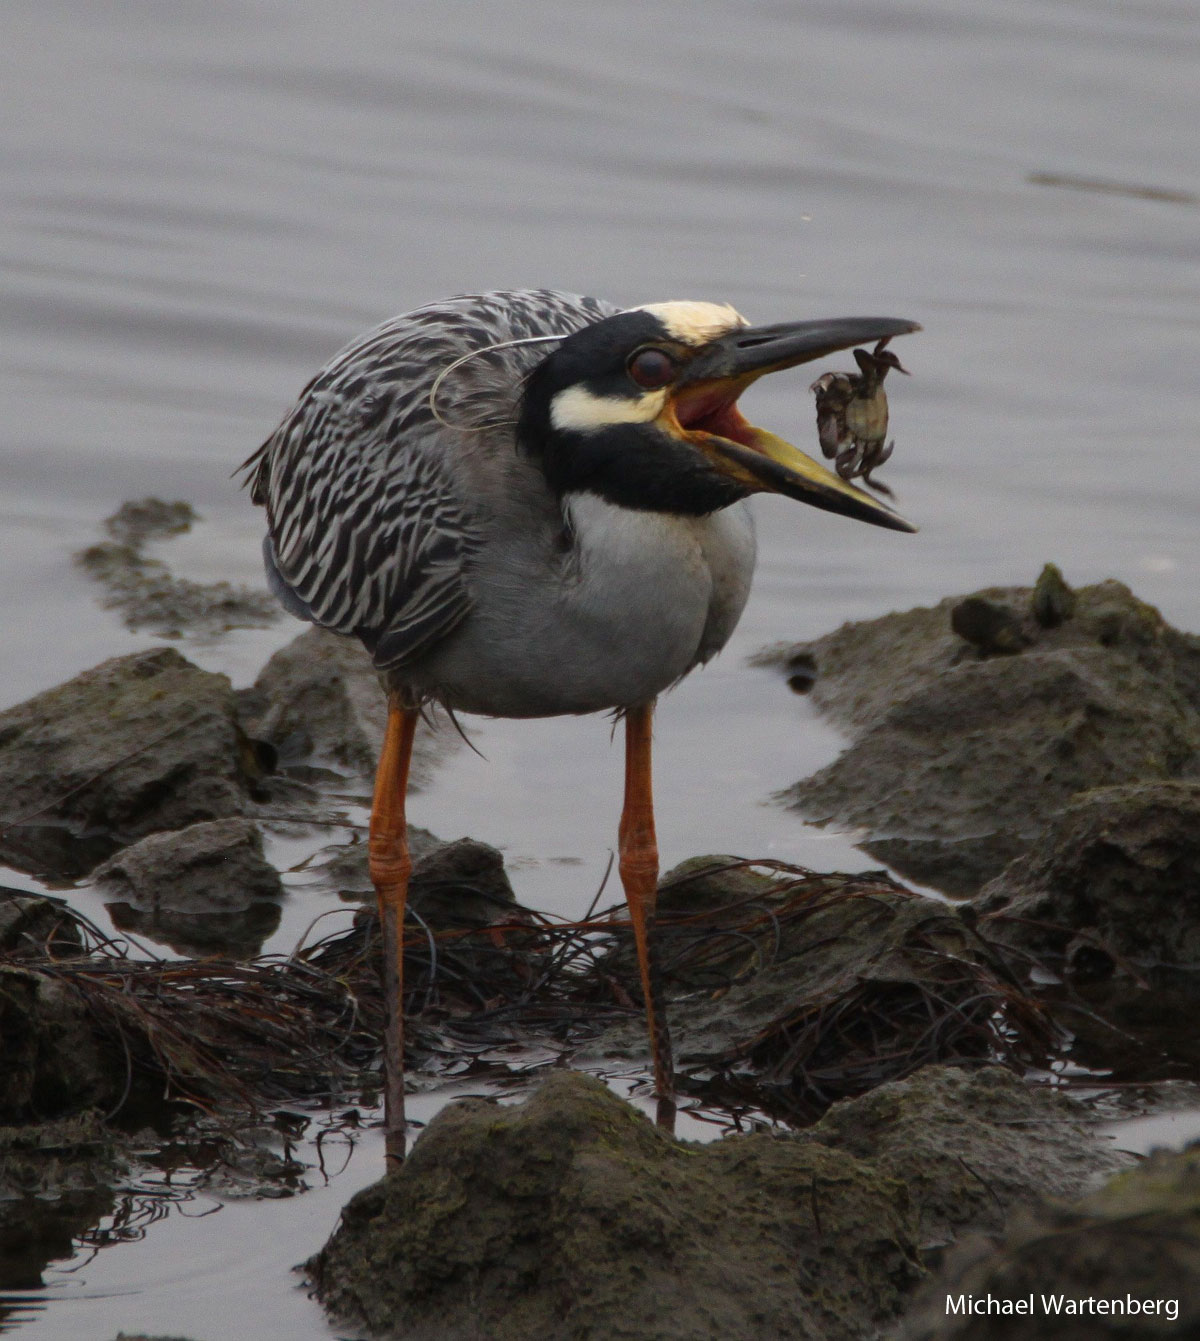 Photo of bird with wide open beak around a small crab. Black, white and gray feathers and orange legs.